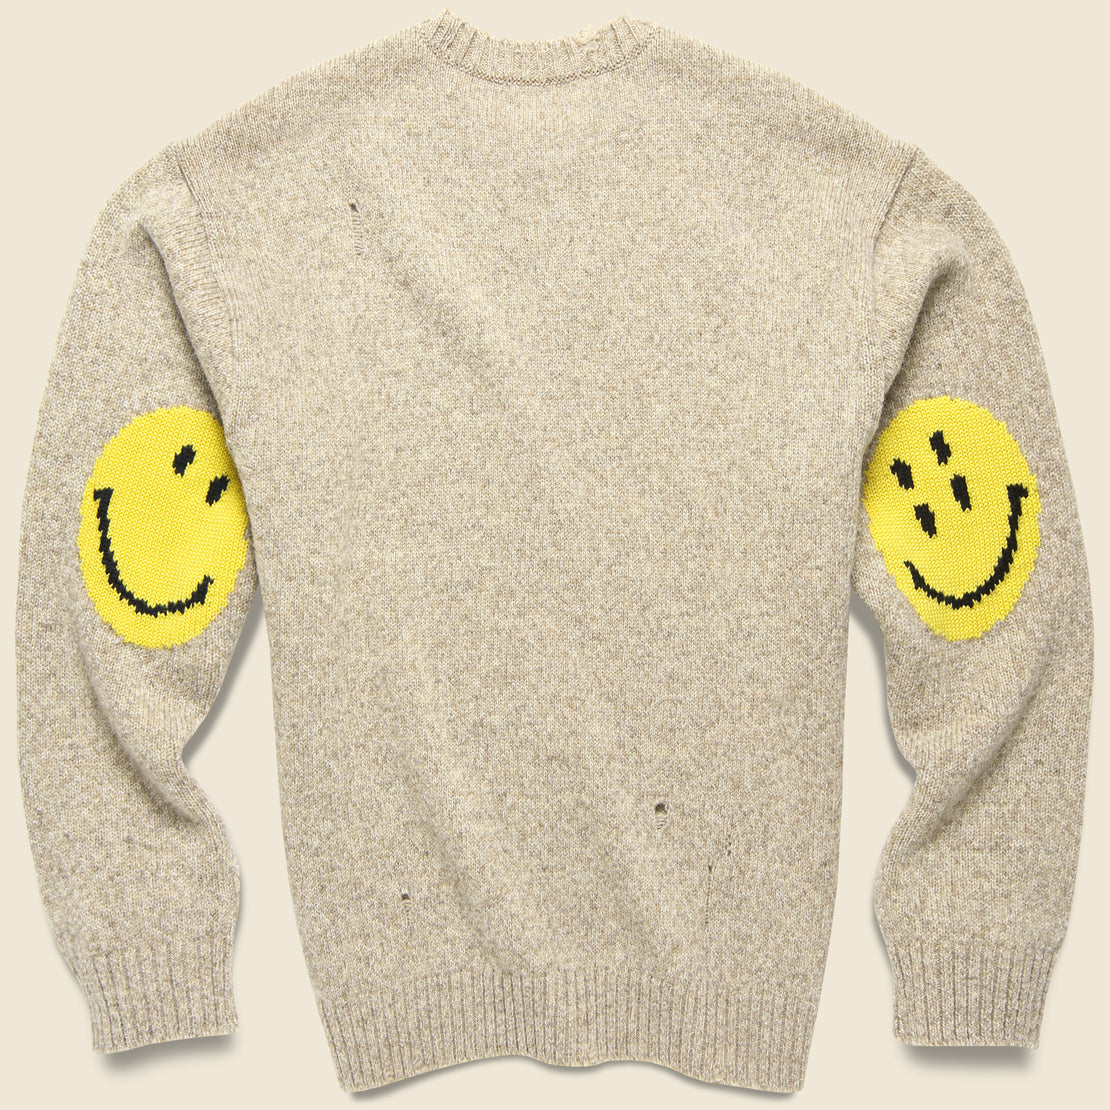 7G Wool SMILIE Crew Sweater - Beige - Kapital - STAG Provisions - Tops - Sweater